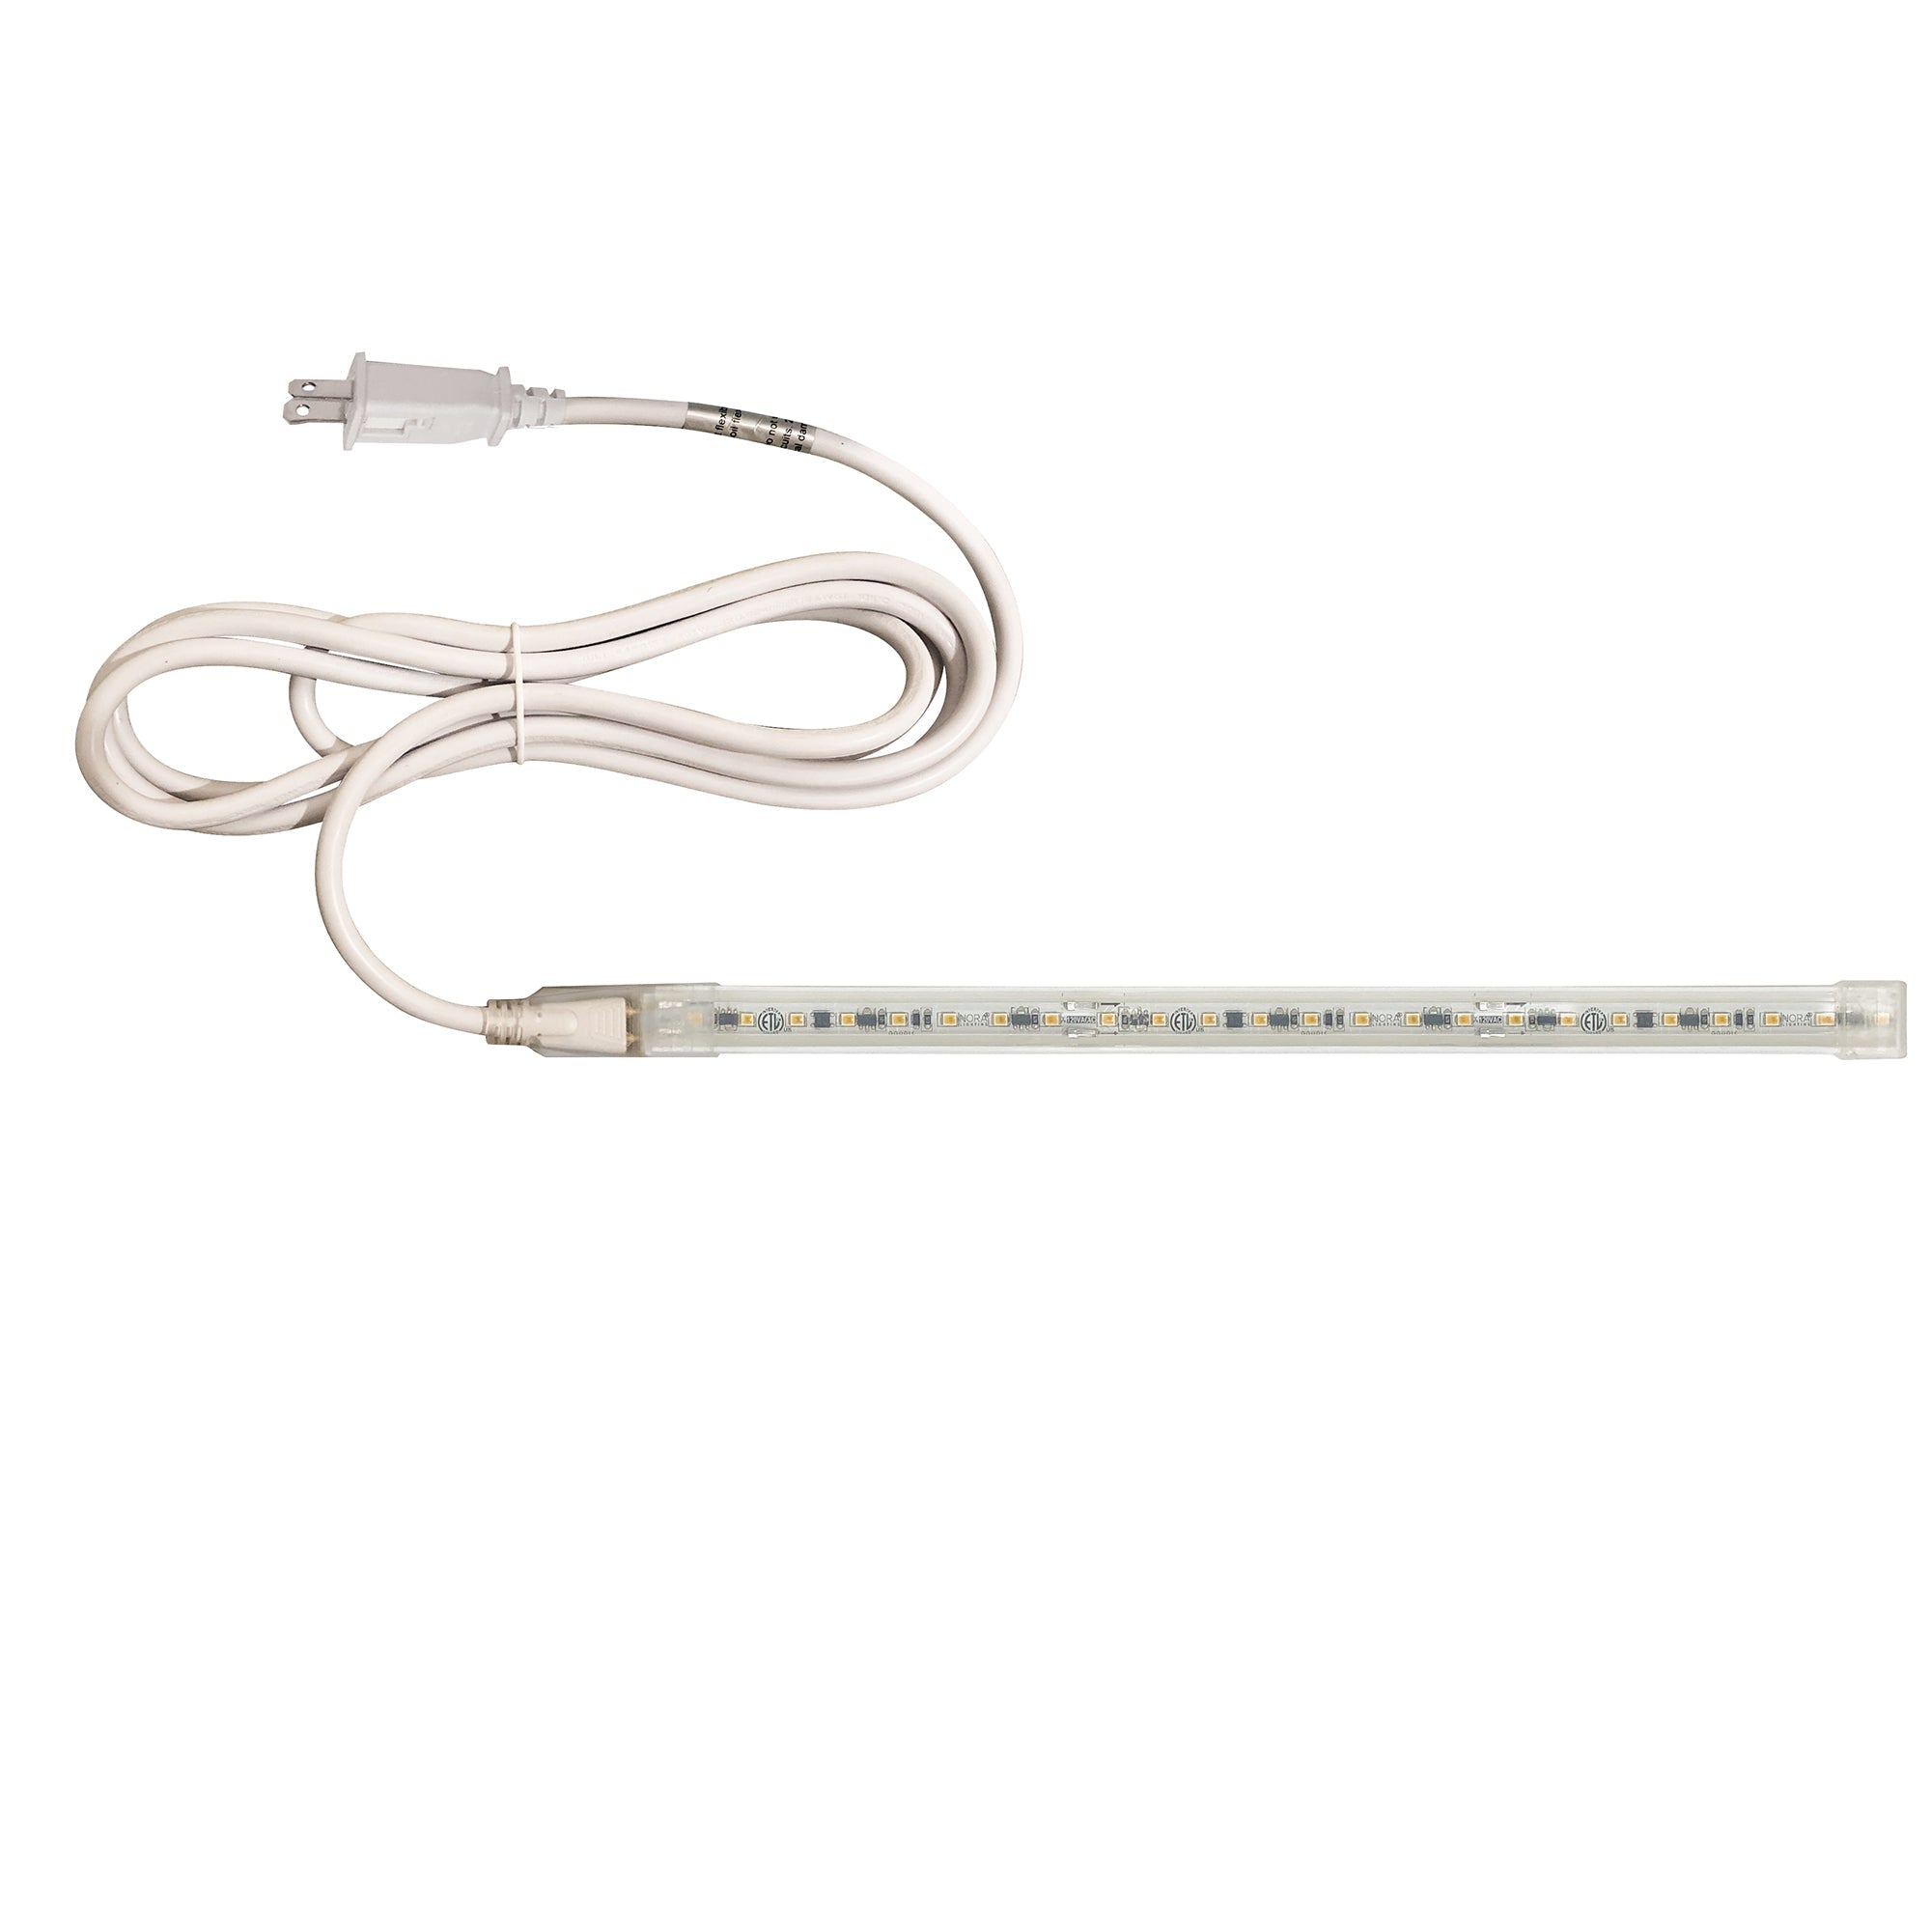 Nora Lighting NUTP13-W78-12-930/CP - Accent / Undercabinet - Custom Cut 78-ft 120V Continuous LED Tape Light, 330lm / 3.6W per foot, 3000K, w/ Mounting Clips and 8' Cord & Plug